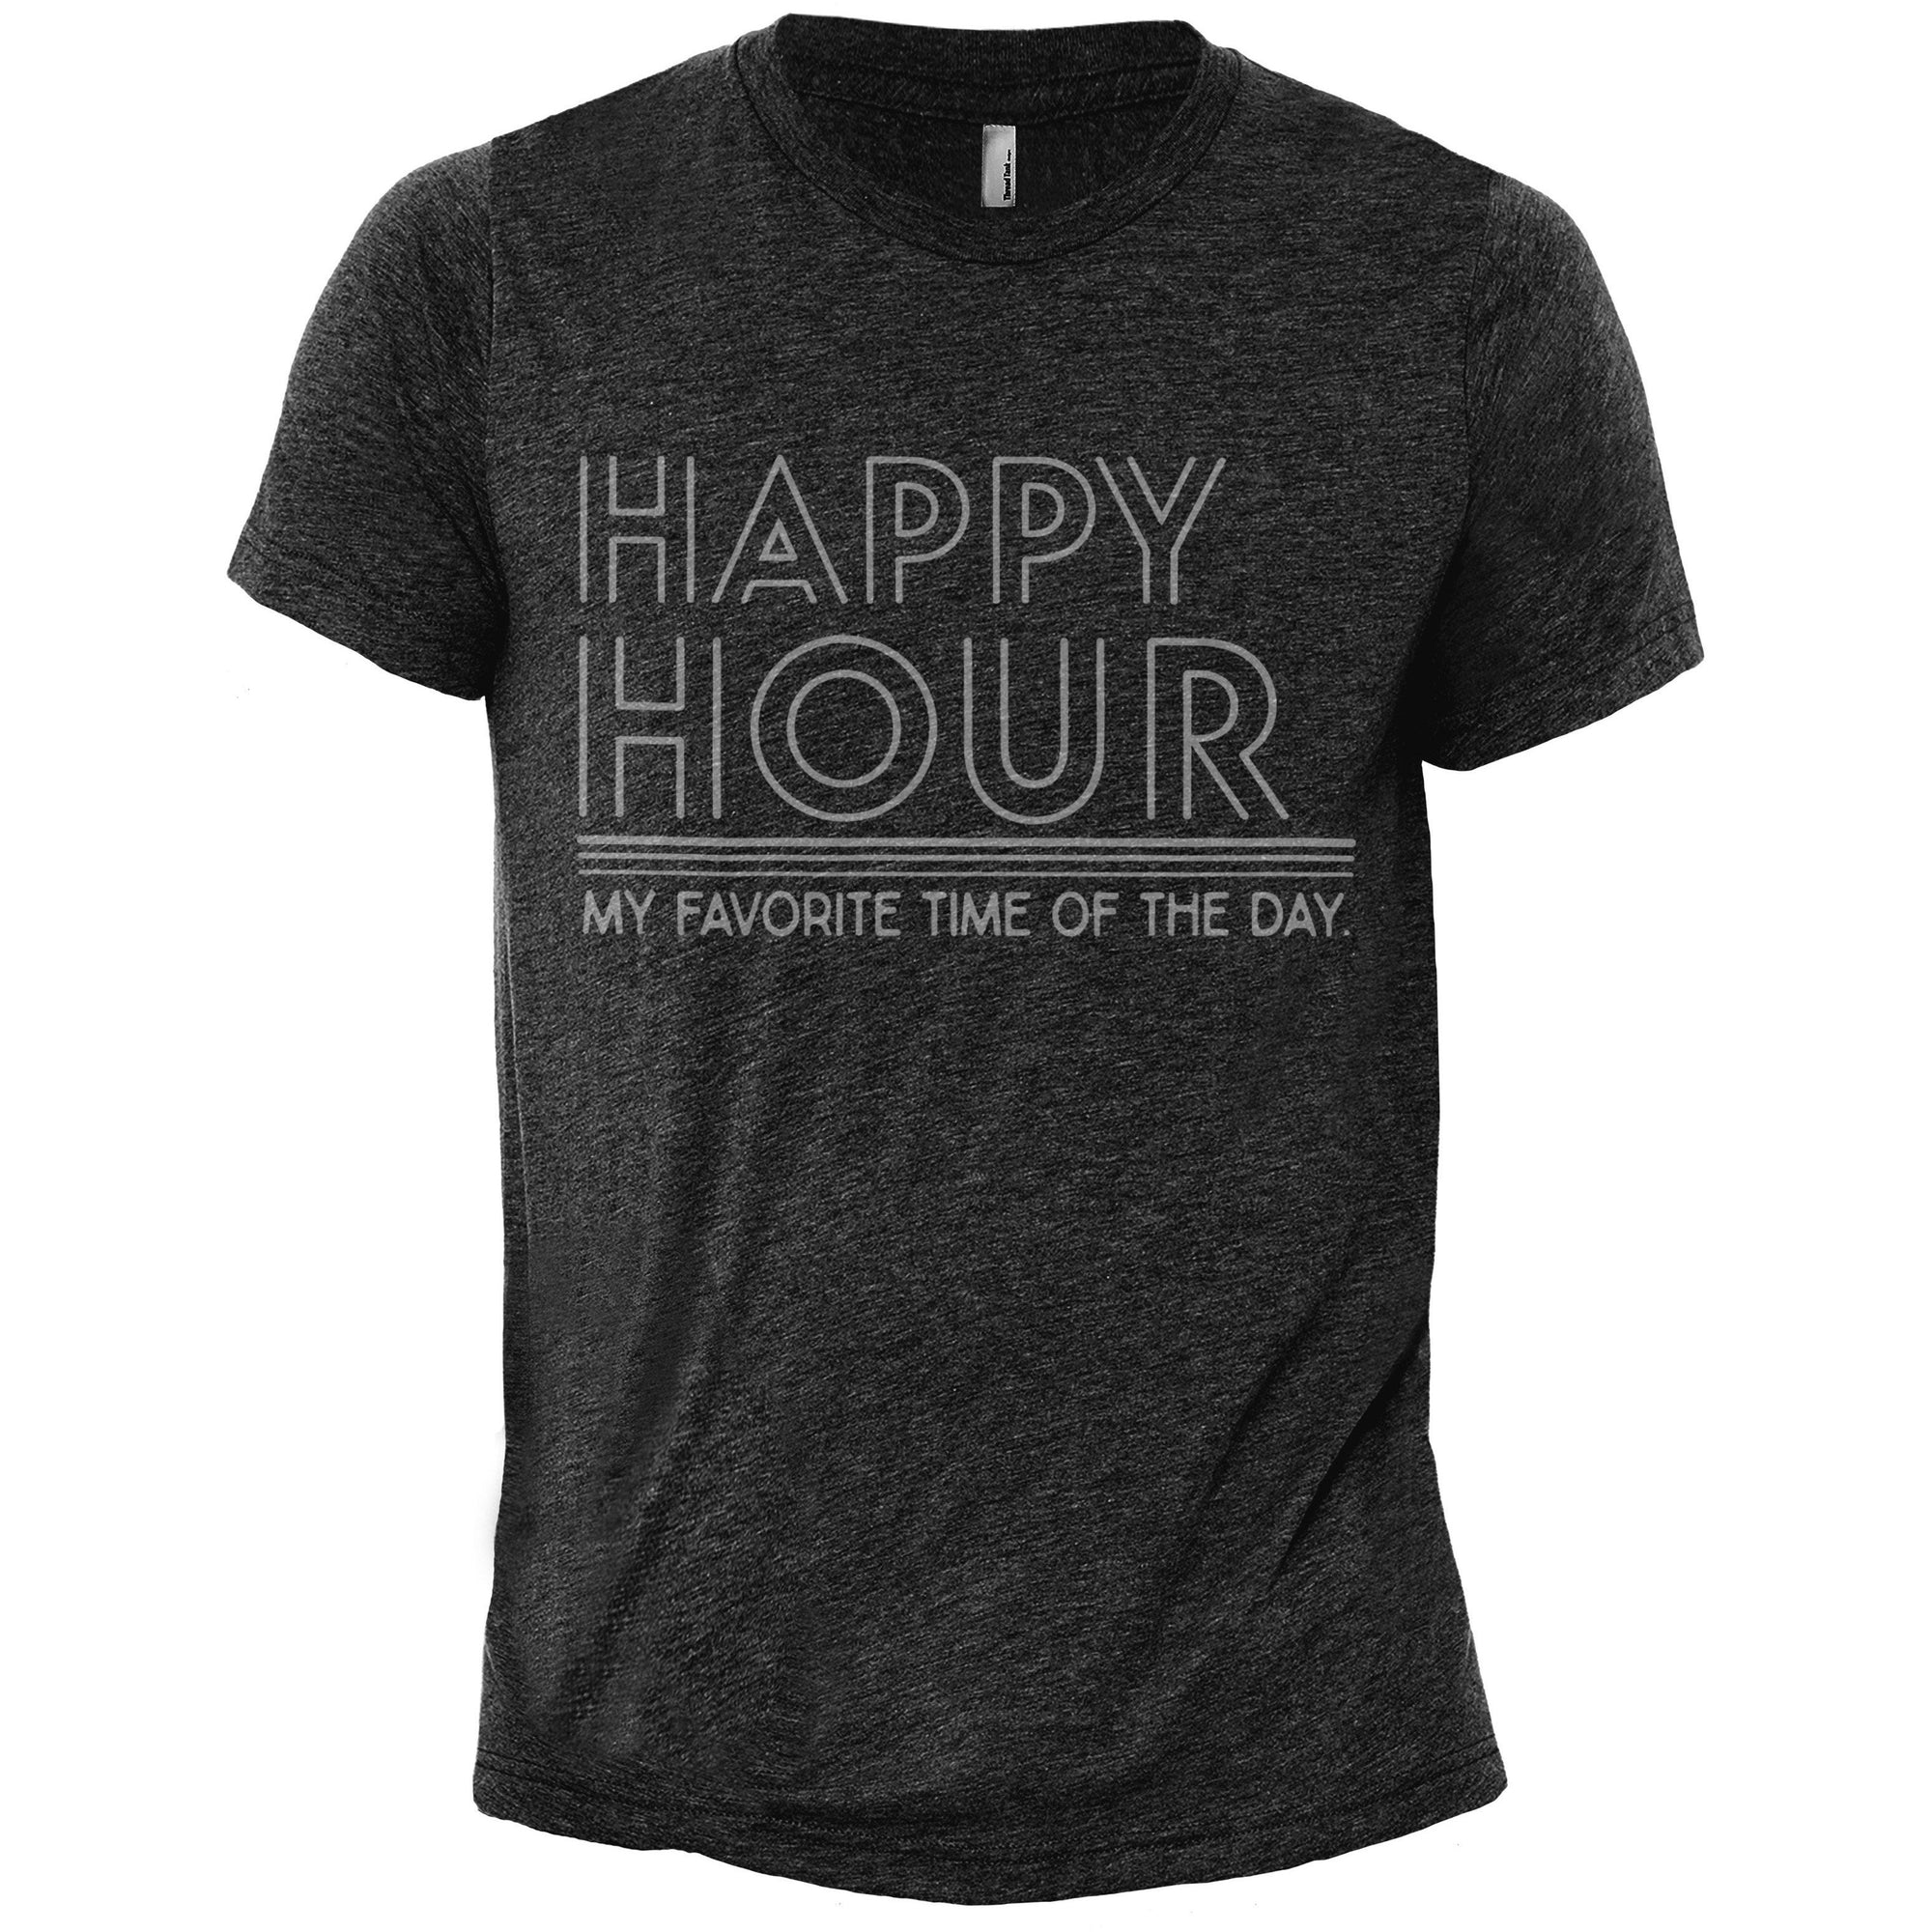 Happy Hour Charcoal Printed Graphic Men's Crew T-Shirt Tee